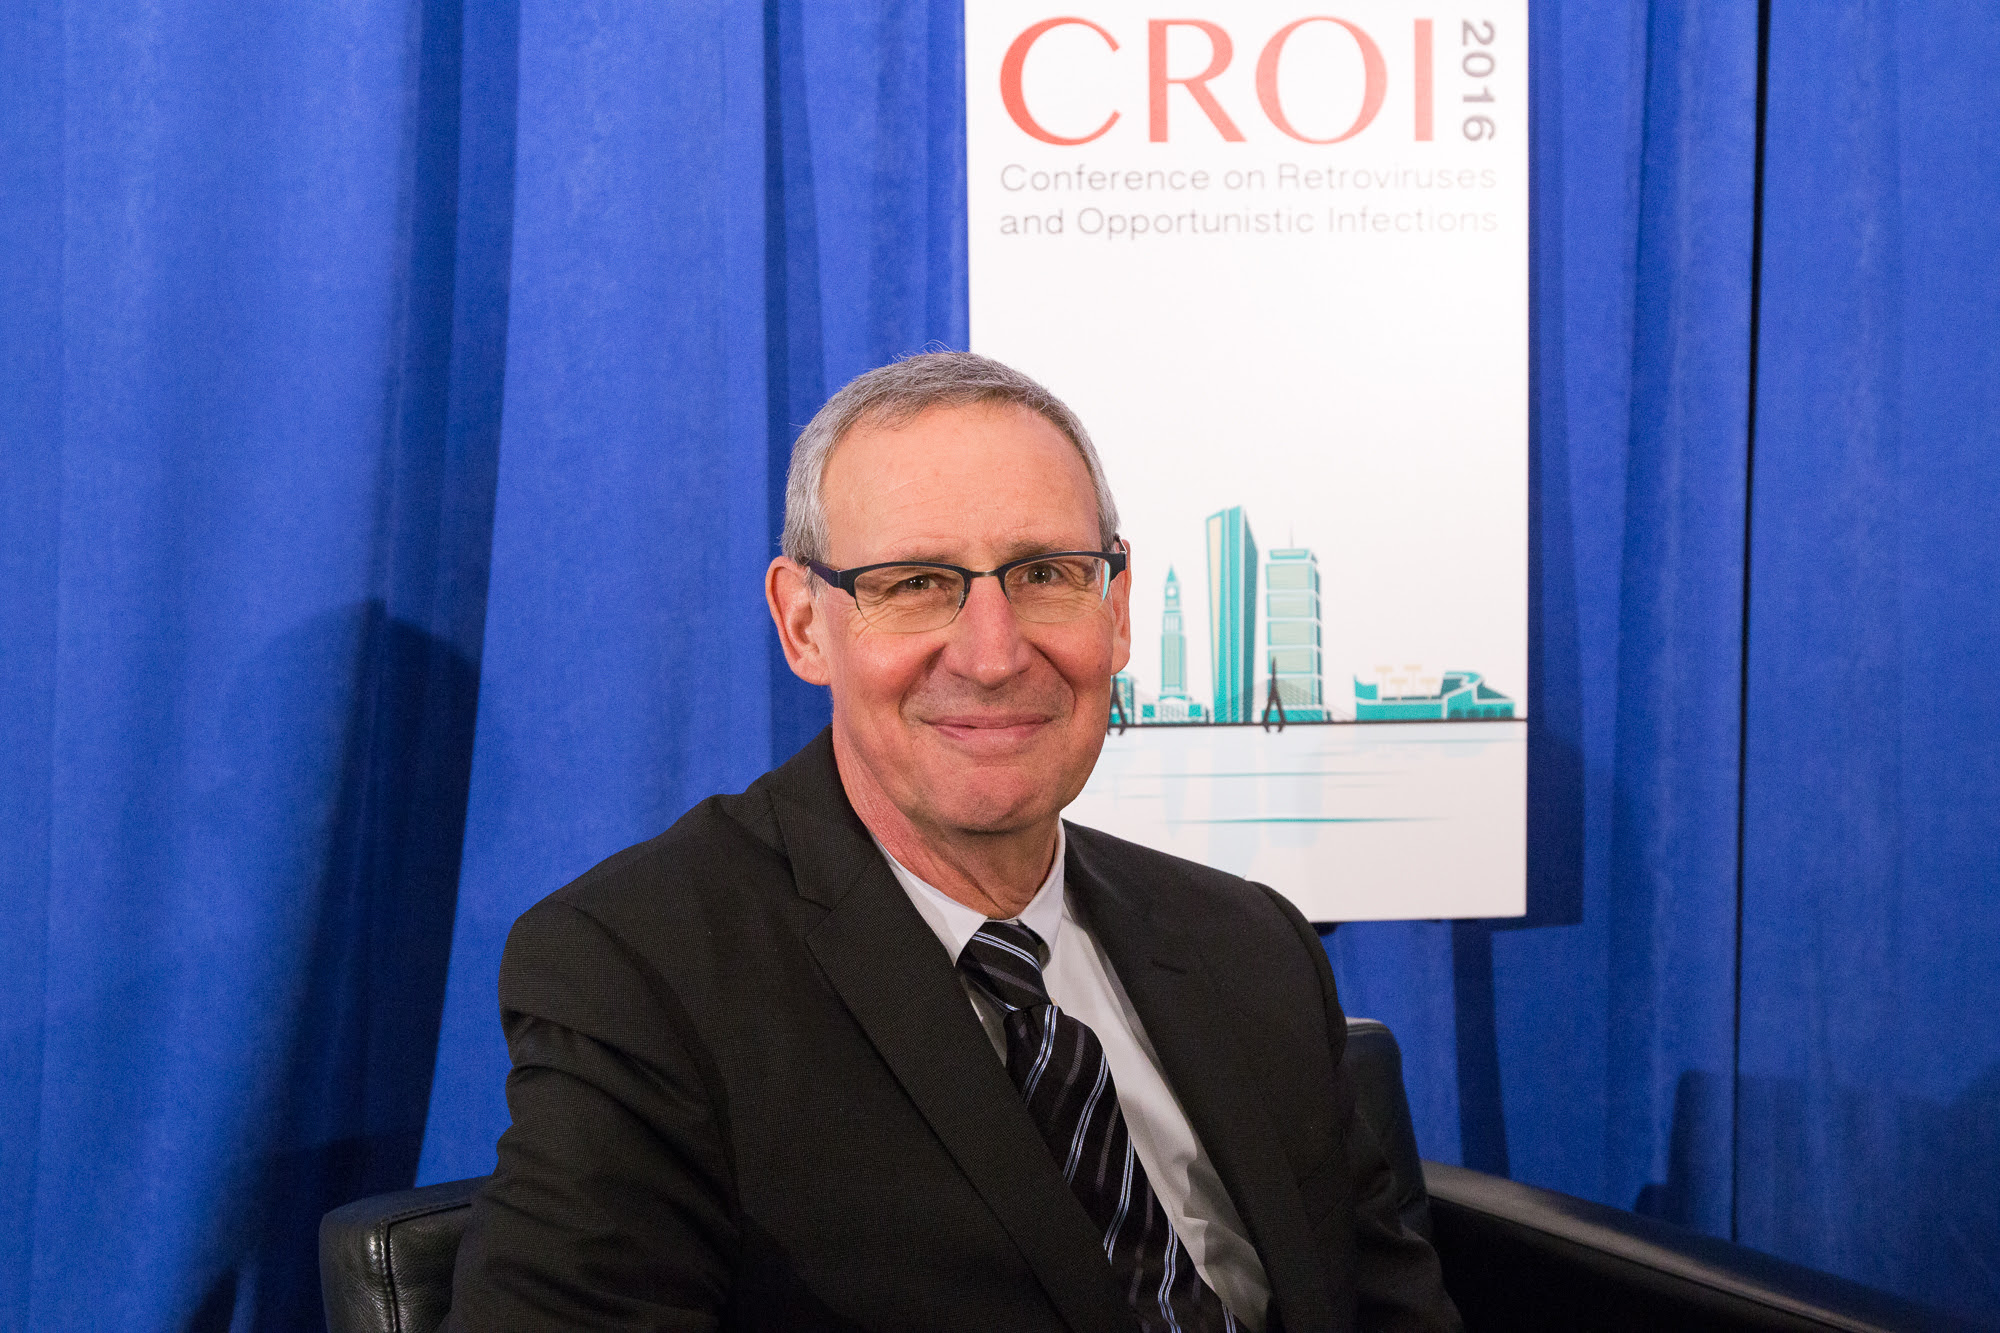 Dr. Dieffenbach at 2016 CROI Conference